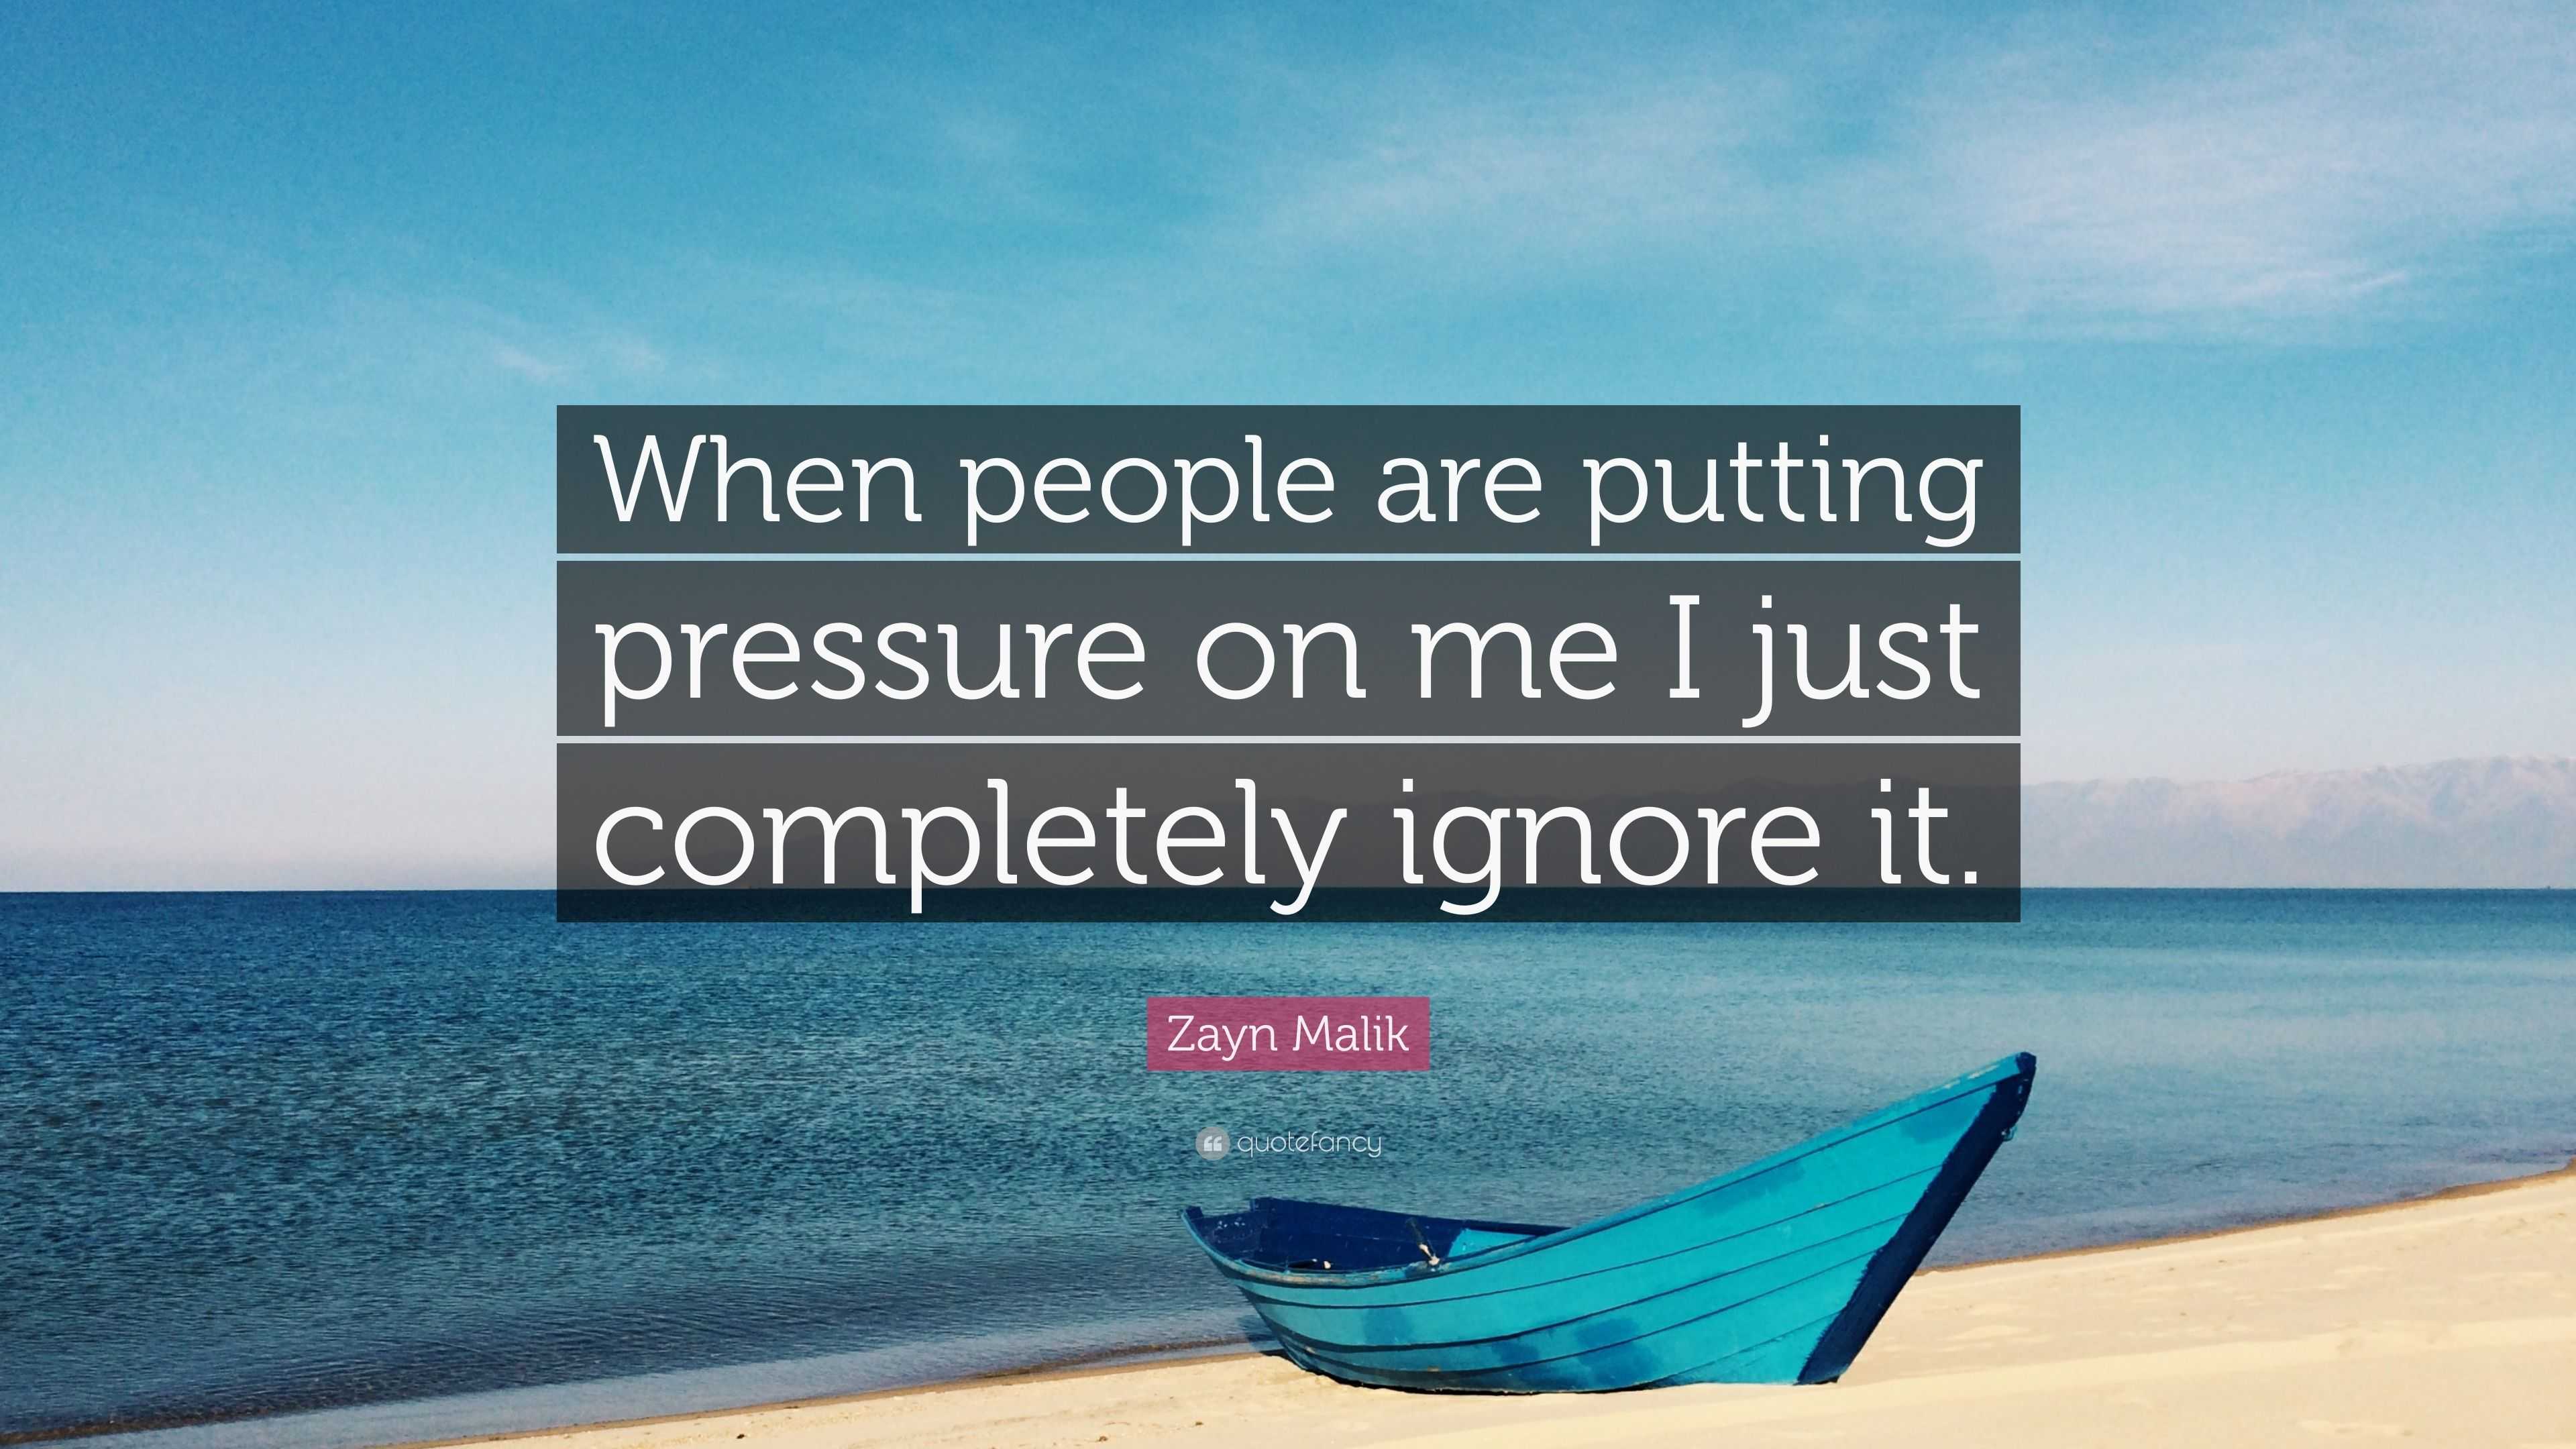 https://quotefancy.com/media/wallpaper/3840x2160/2420444-Zayn-Malik-Quote-When-people-are-putting-pressure-on-me-I-just.jpg